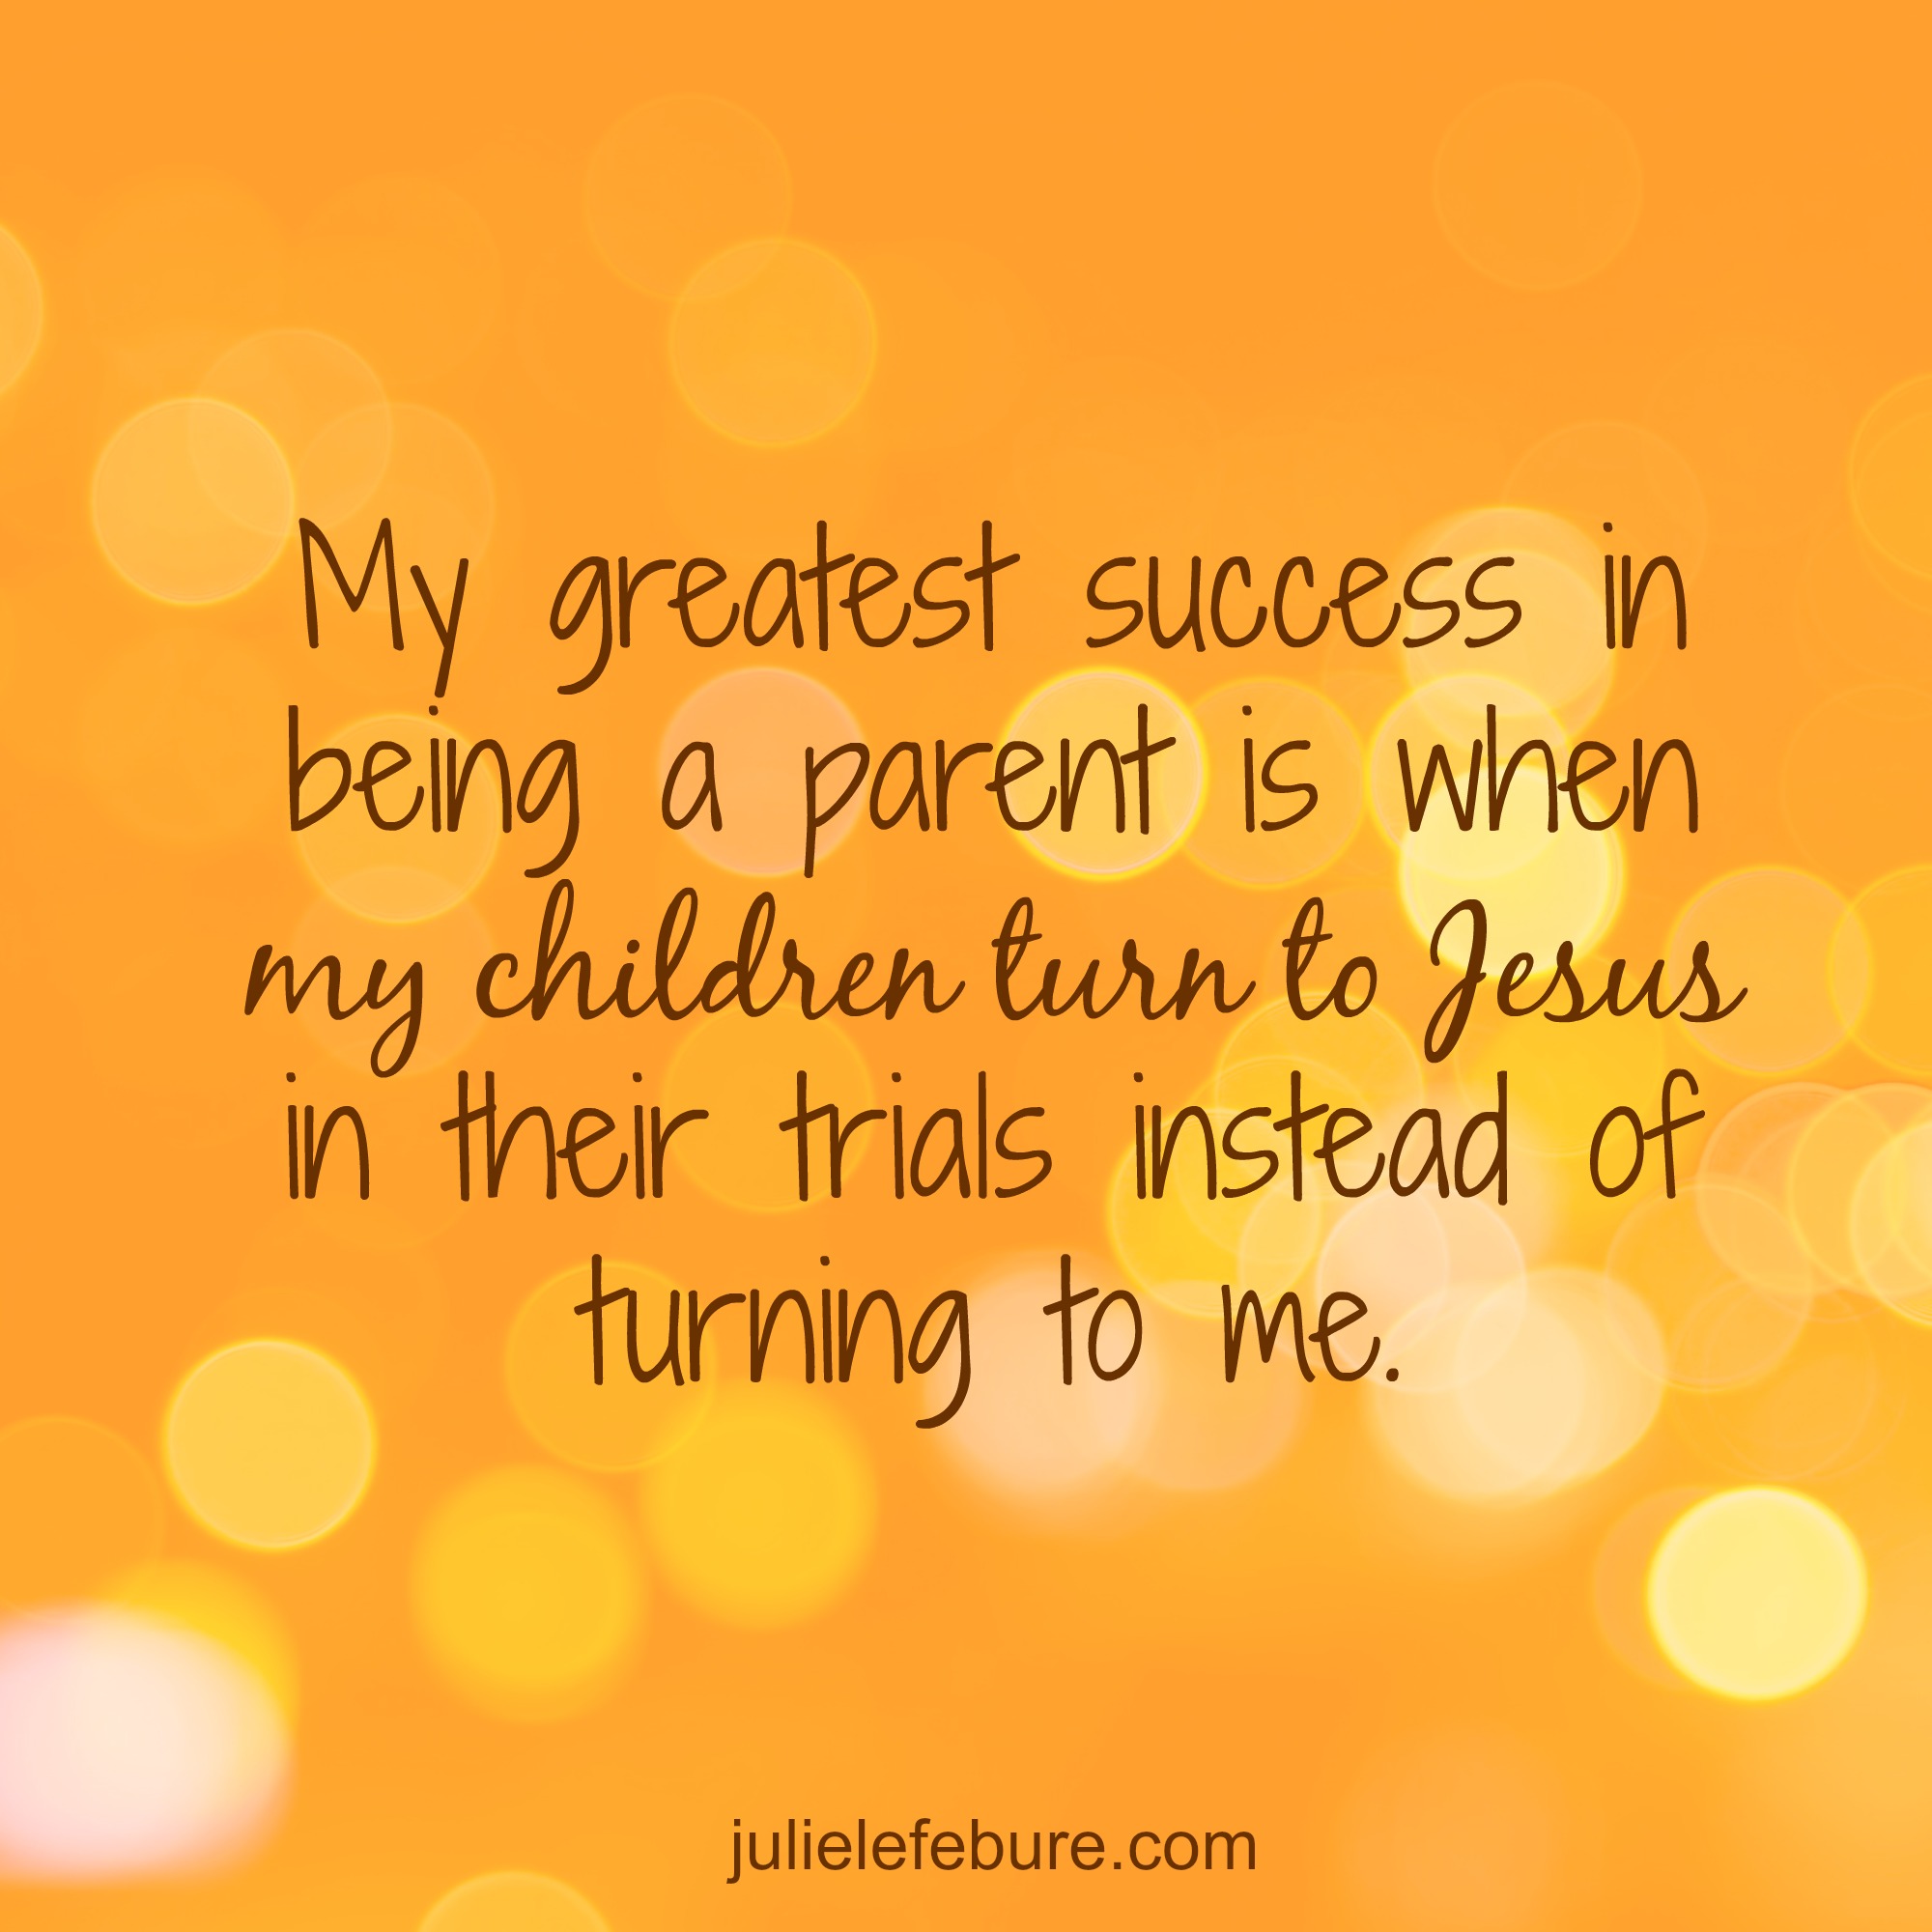 The Greatest Success in Parenting